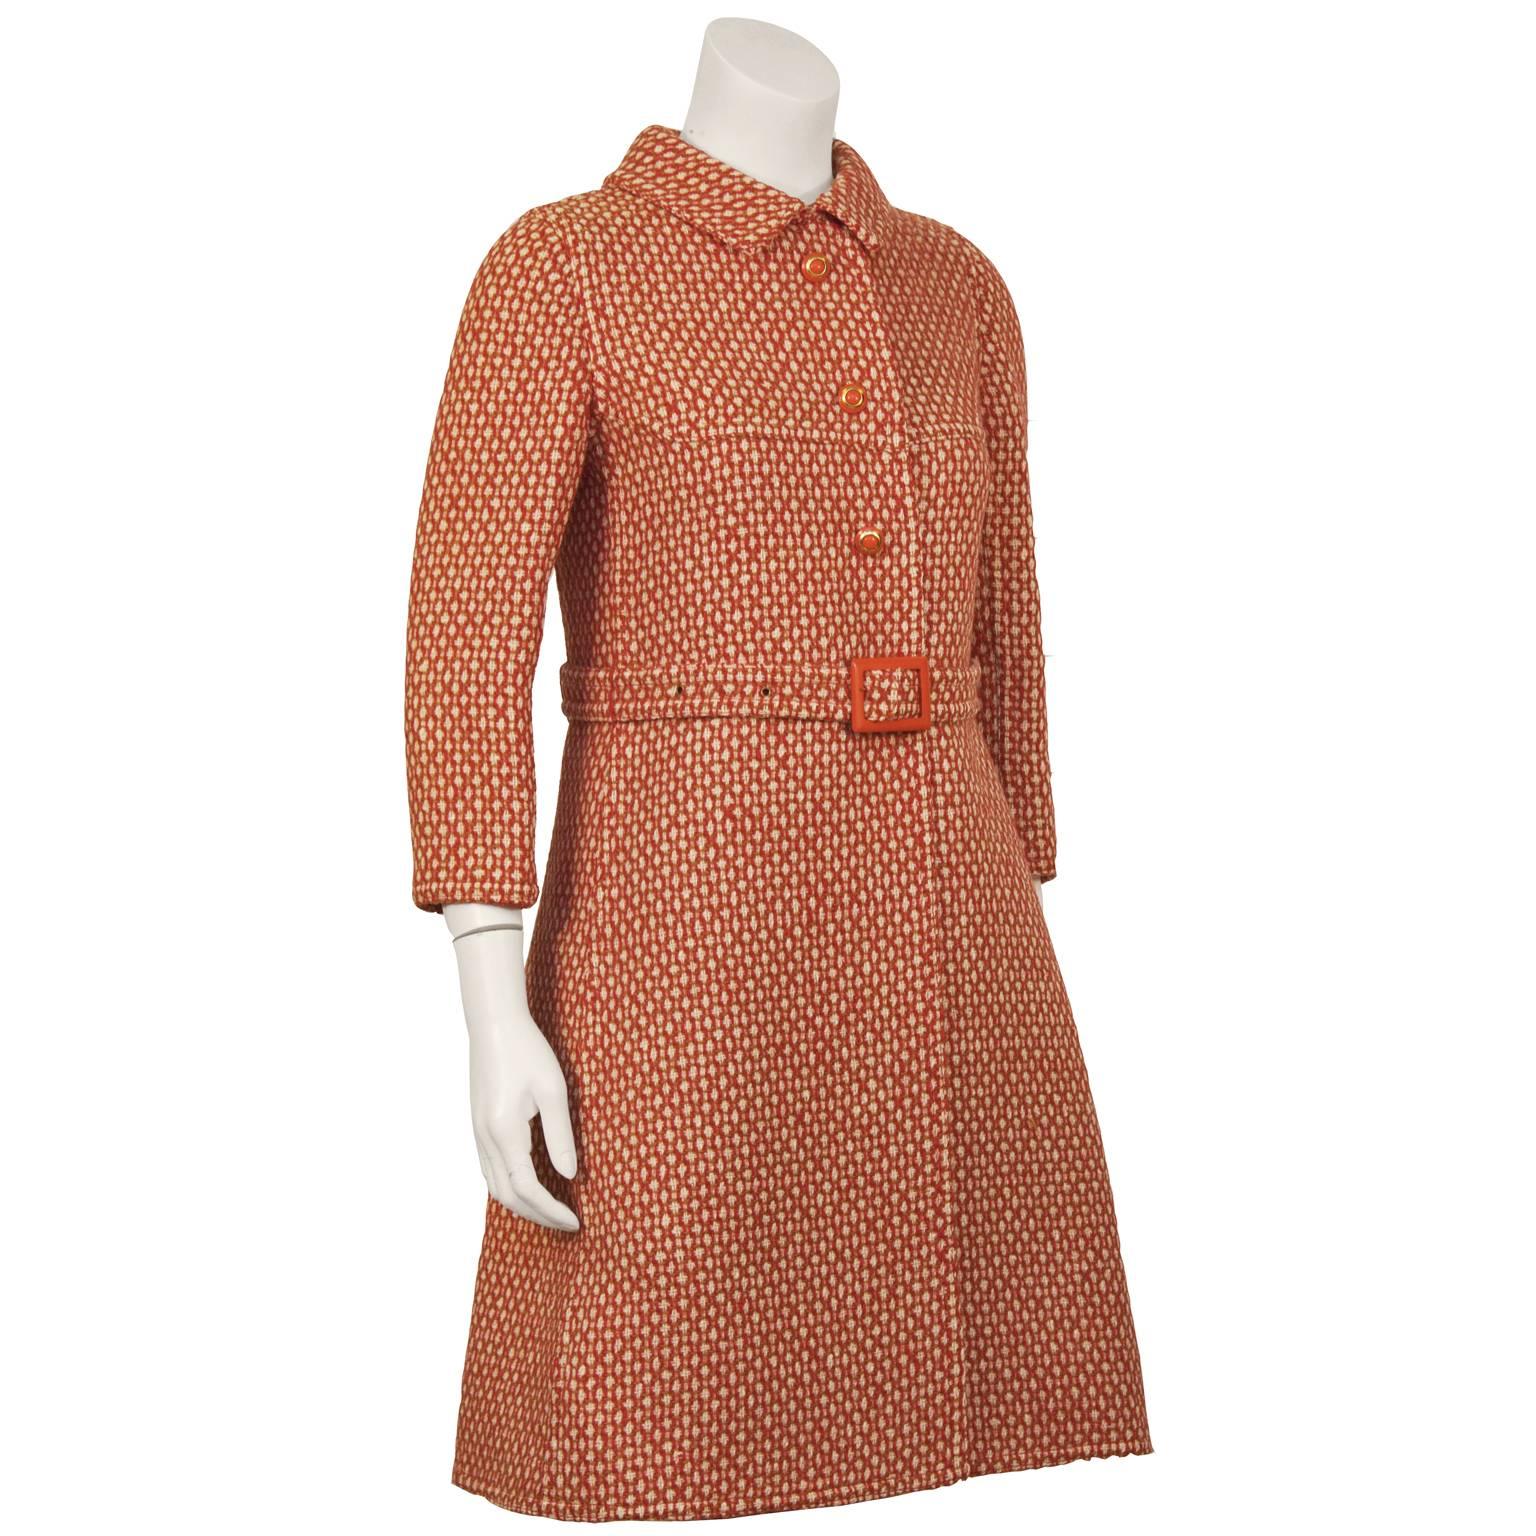 Storied Italian designer Antonelli 1960’s red and white and tan wool and mohair blend coat and skirt ensemble. The coat and skirt are both unlined made of two patterned wools fused together. The skirt is reversible and has two zippers on both back